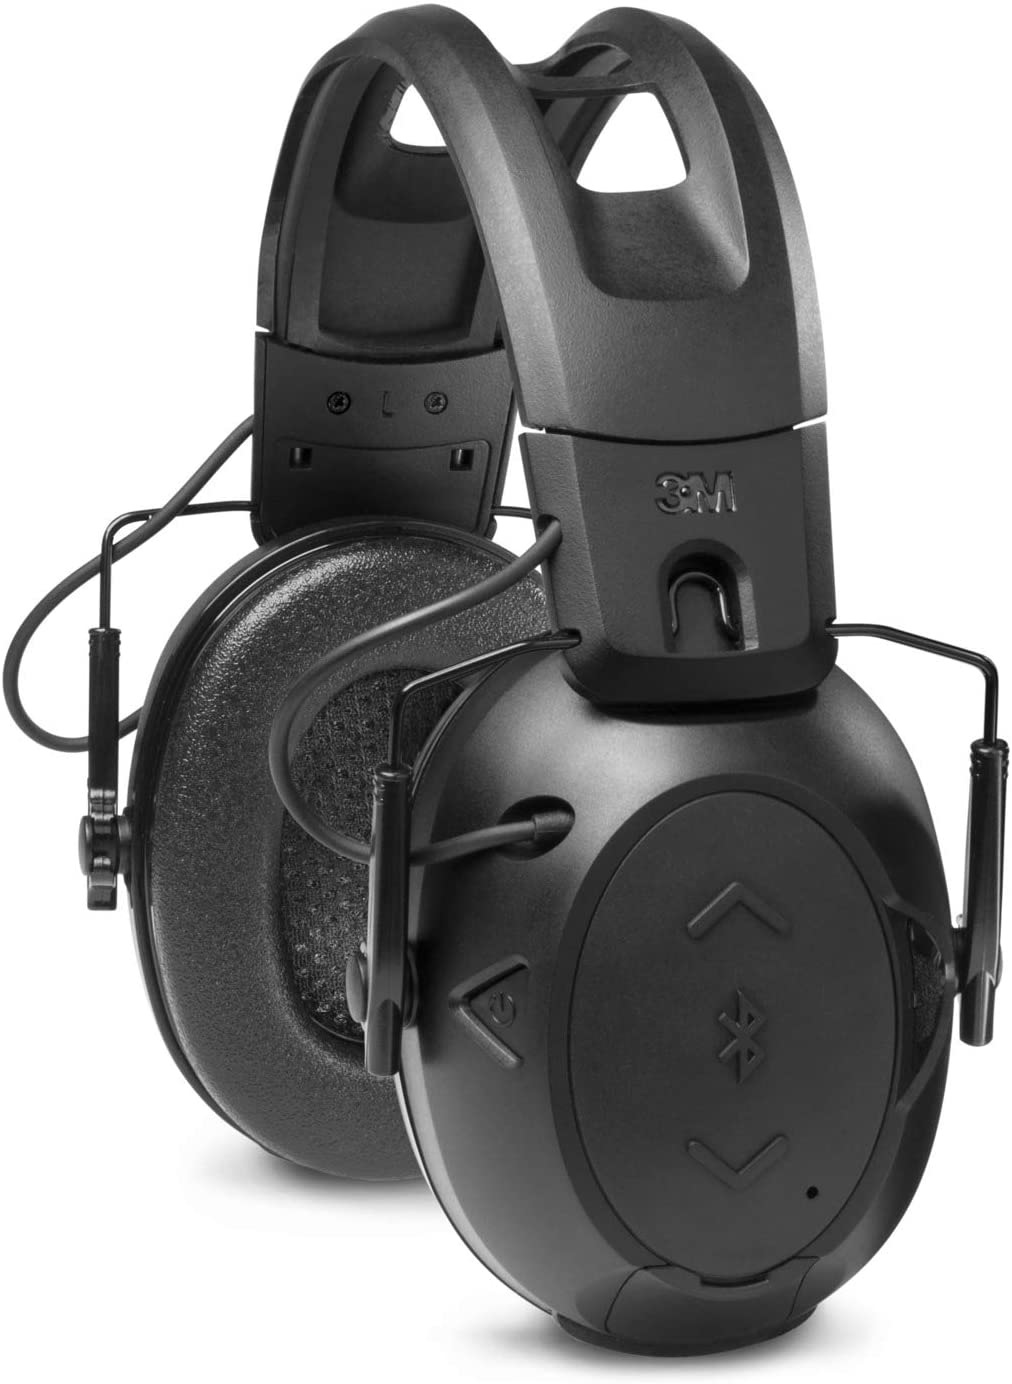 HEARING PROTECTION TACTICAL, NRR 26 - Earmuffs